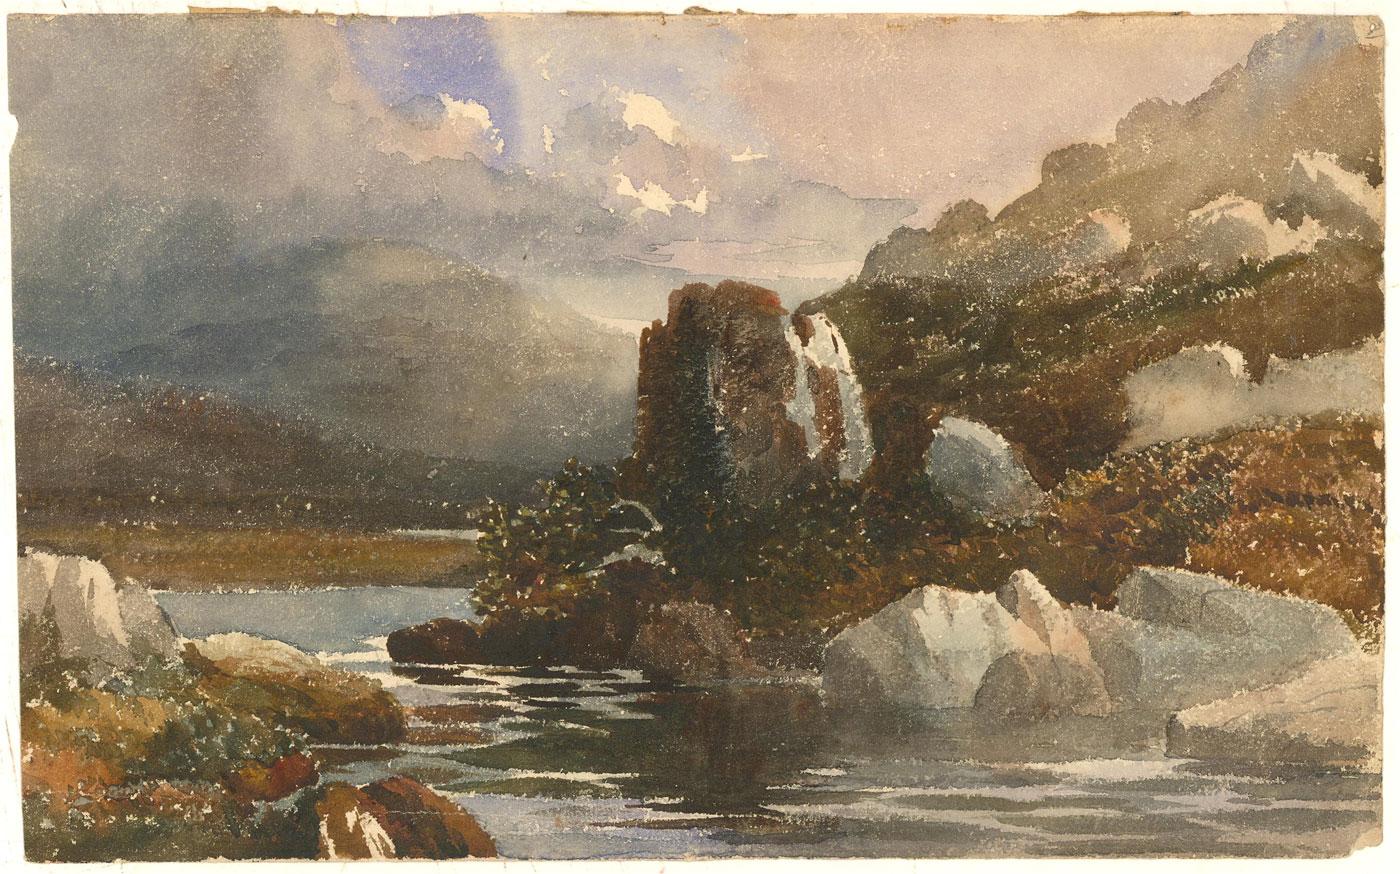 Depicting a peaceful river running through a mountainous landscape this fine watercolour has the hallmarks of the British painter David Hall McKewan. Originally purchased with the attribution to McKewan already in place this watercolour study is a